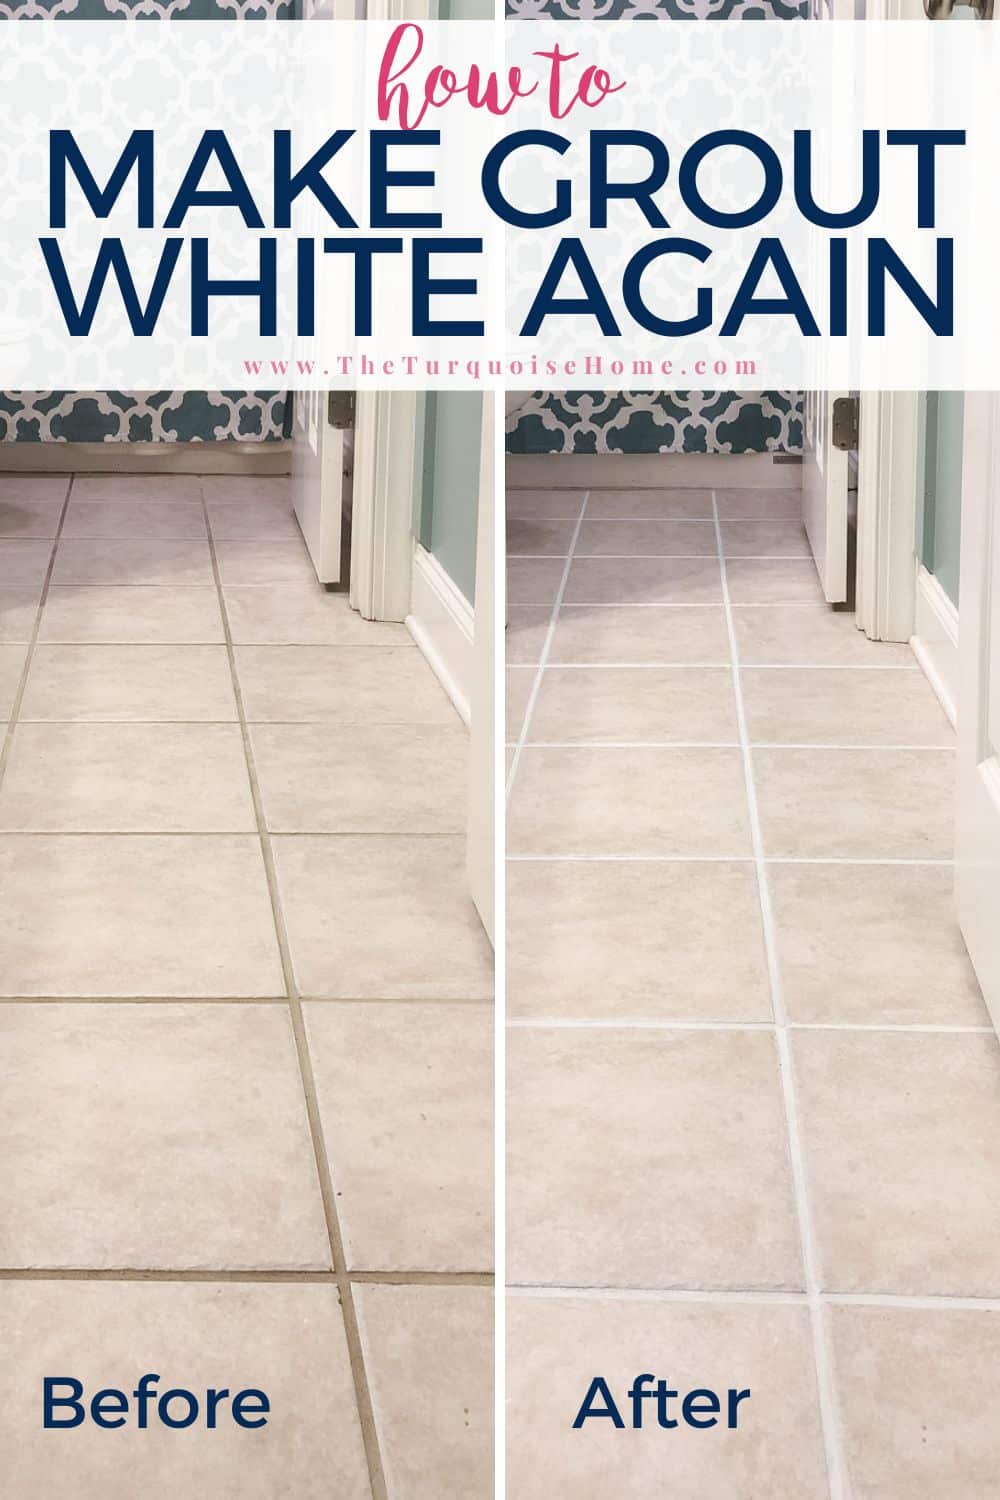 Before and after photos of using white grout paint.